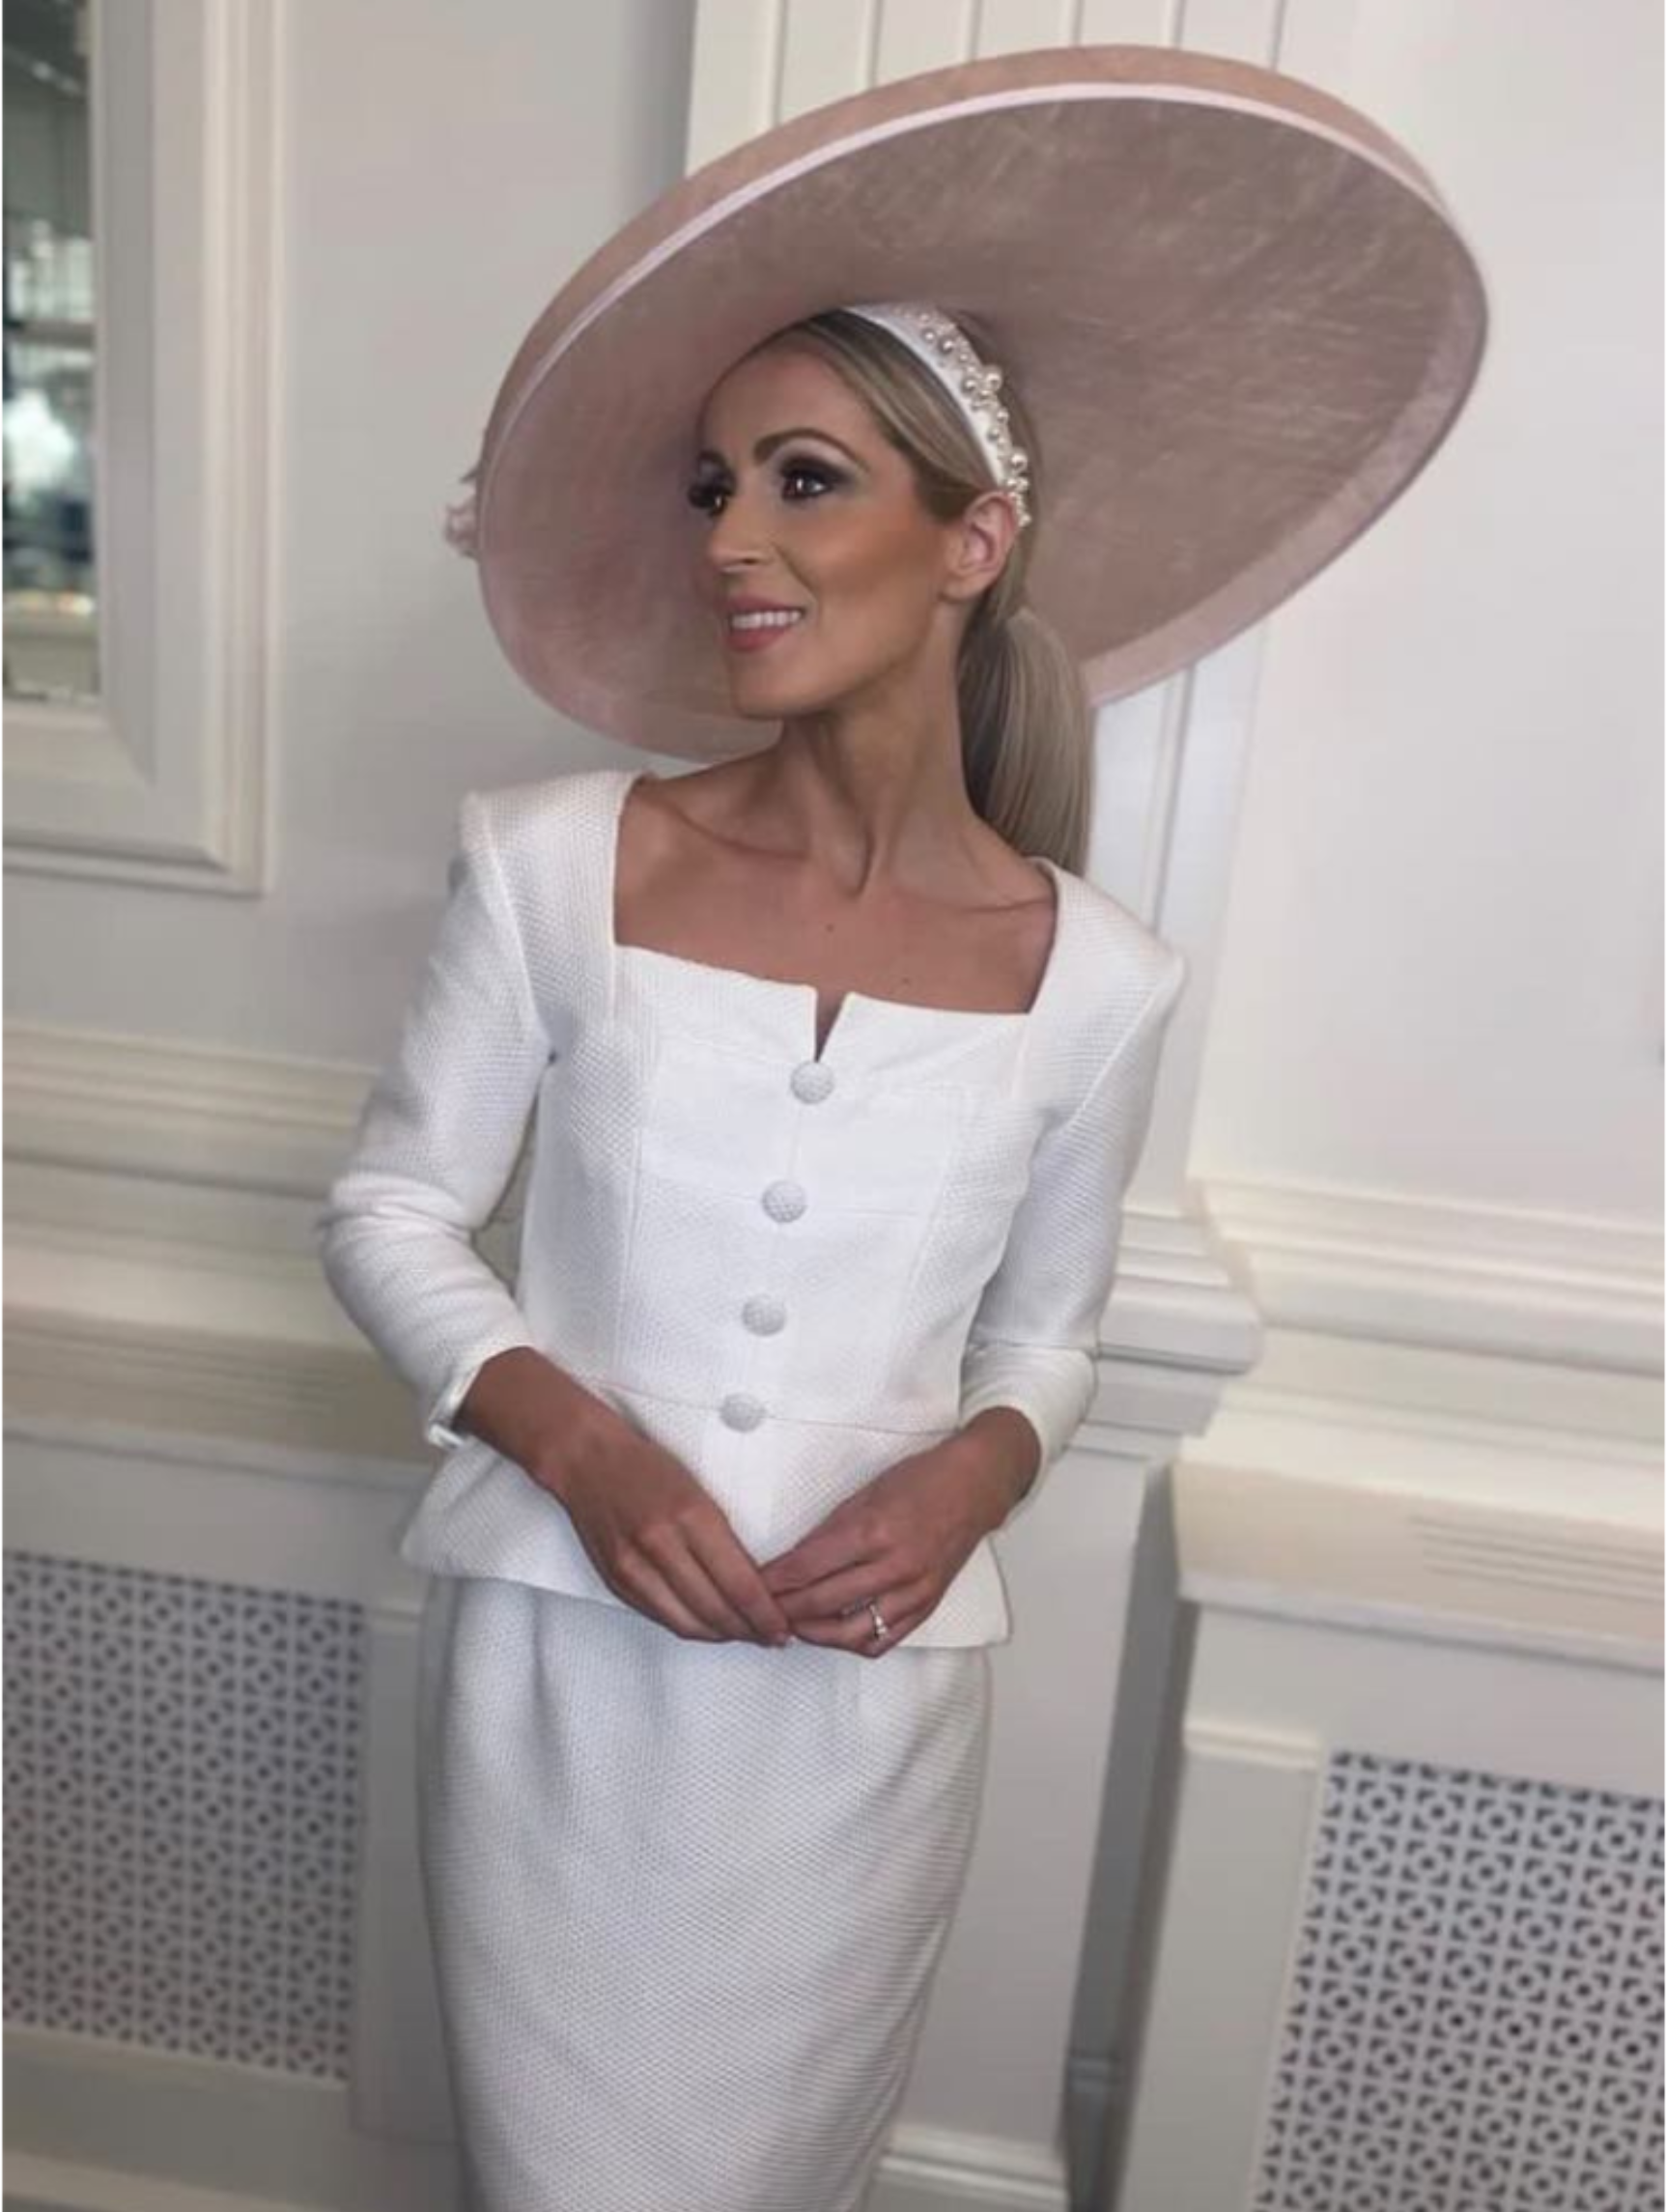 This two piece radiates understated elegance with clean lines and subtle details that create a timeless, classic design inspired by Vintage fashion. Perfect for a wedding or Special Occasion. 